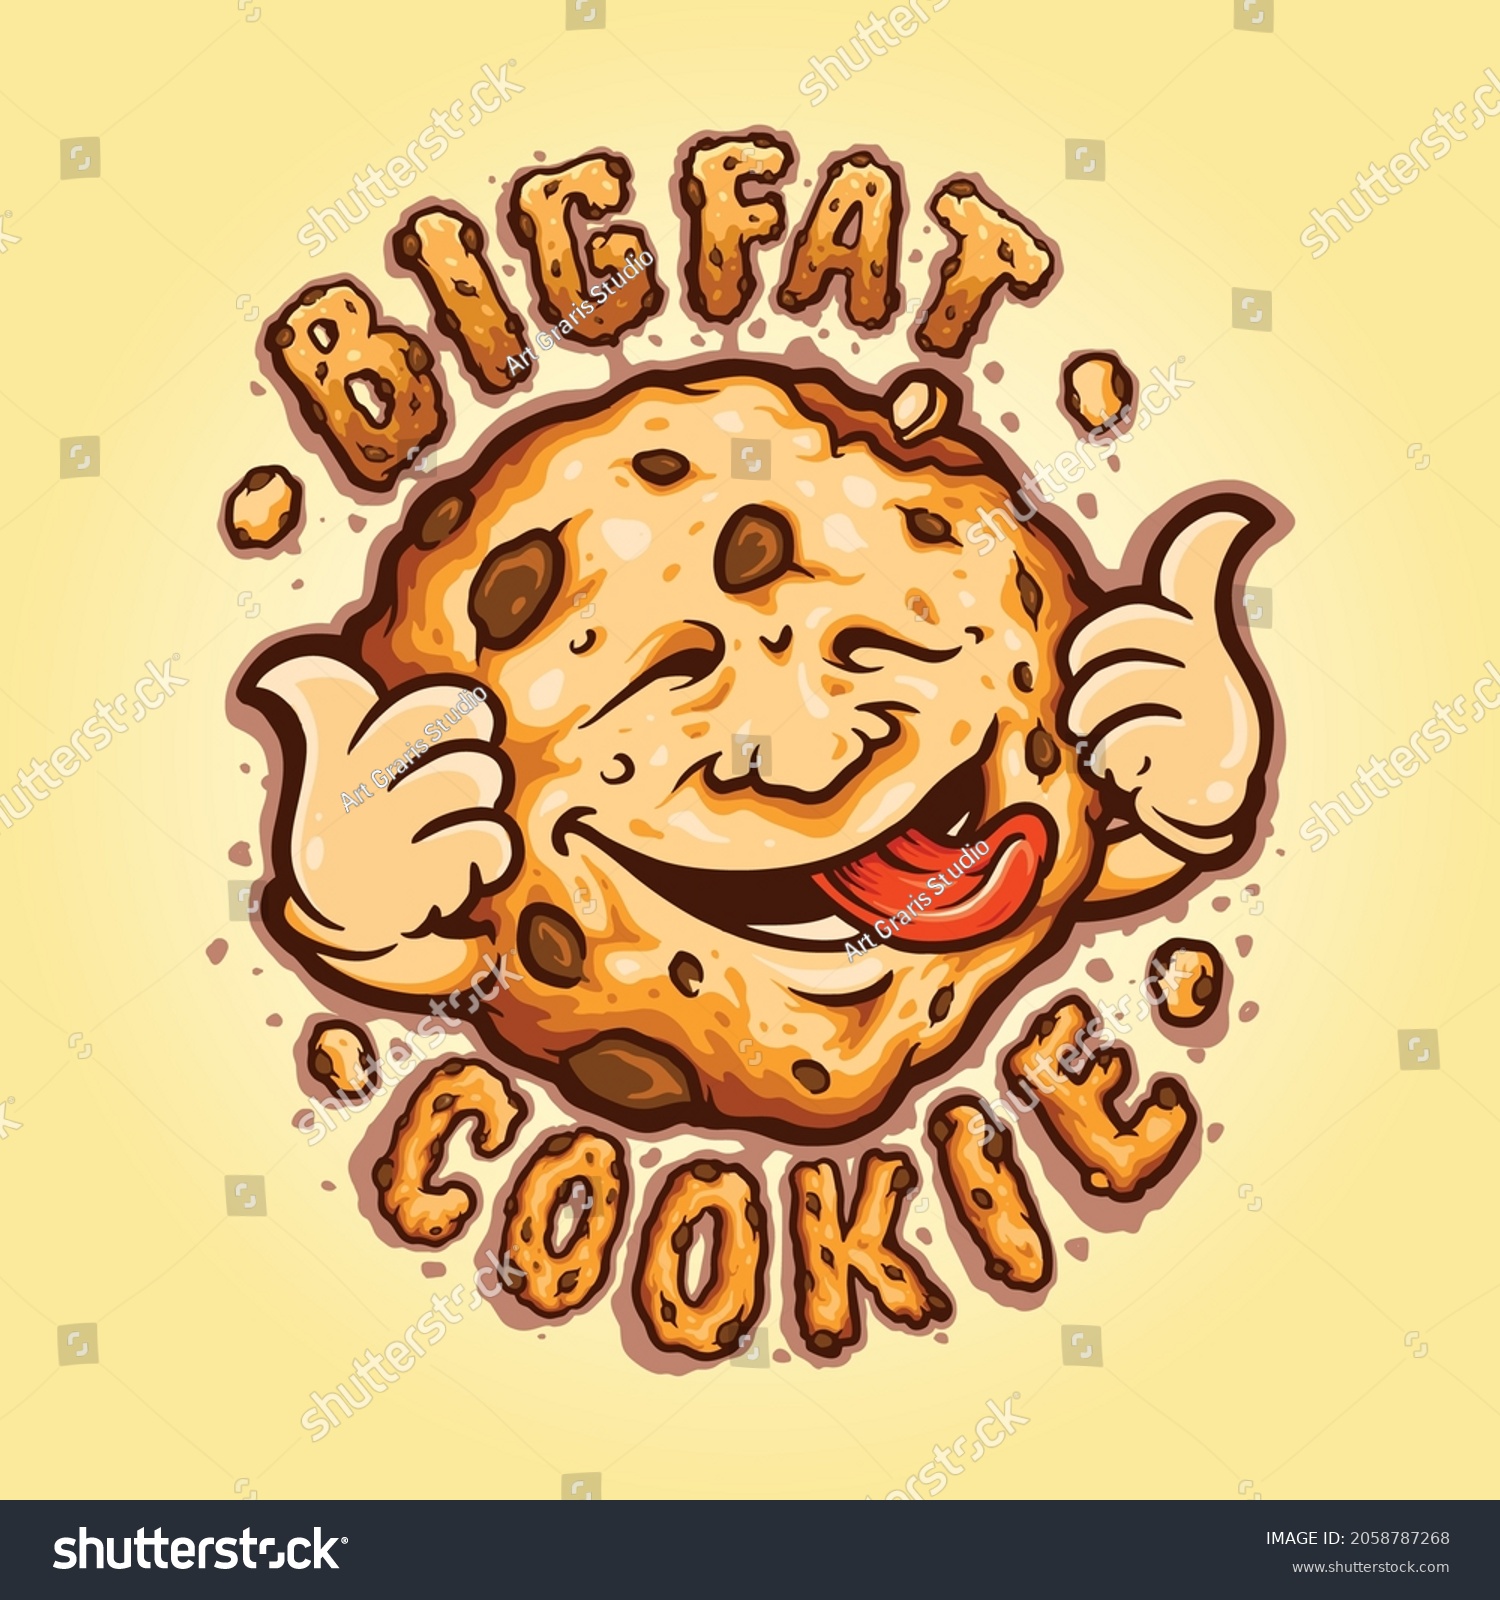 SVG of Cookies Big Fat Biscuit Chocolate Vector illustrations for your work Logo, mascot merchandise t-shirt, stickers and Label designs, poster, greeting cards advertising business company or brands. svg